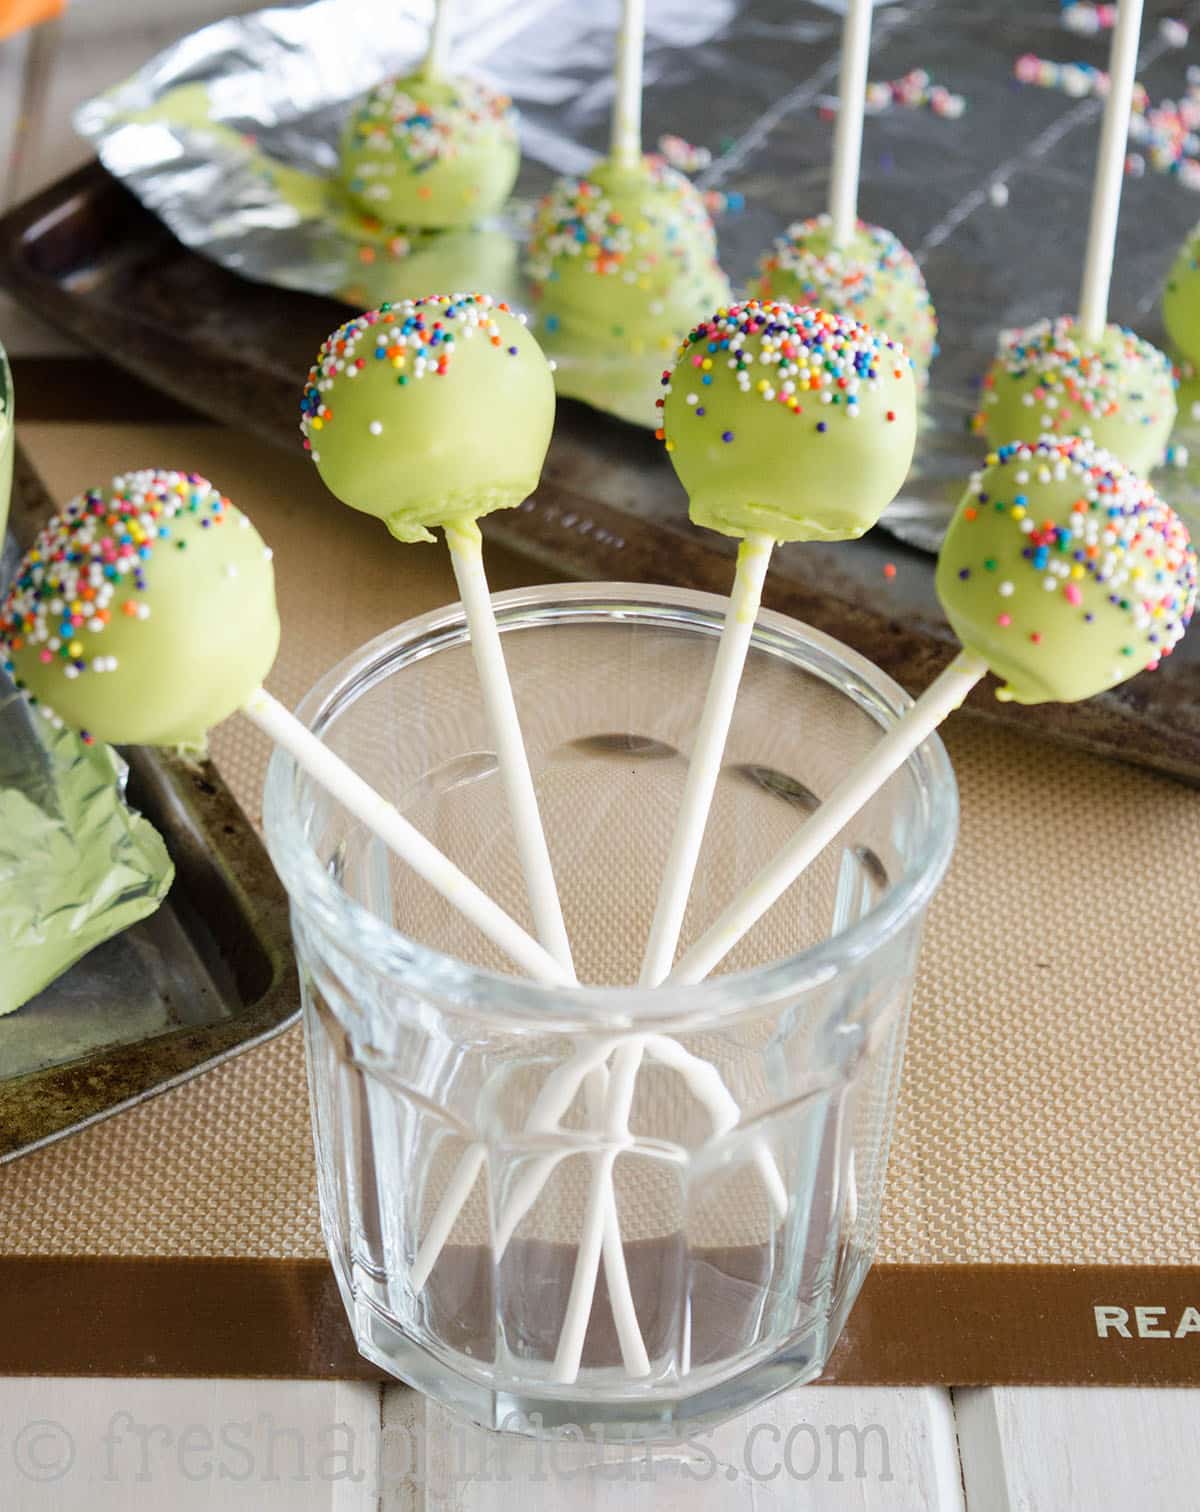 cake pops sitting in a cup to dry